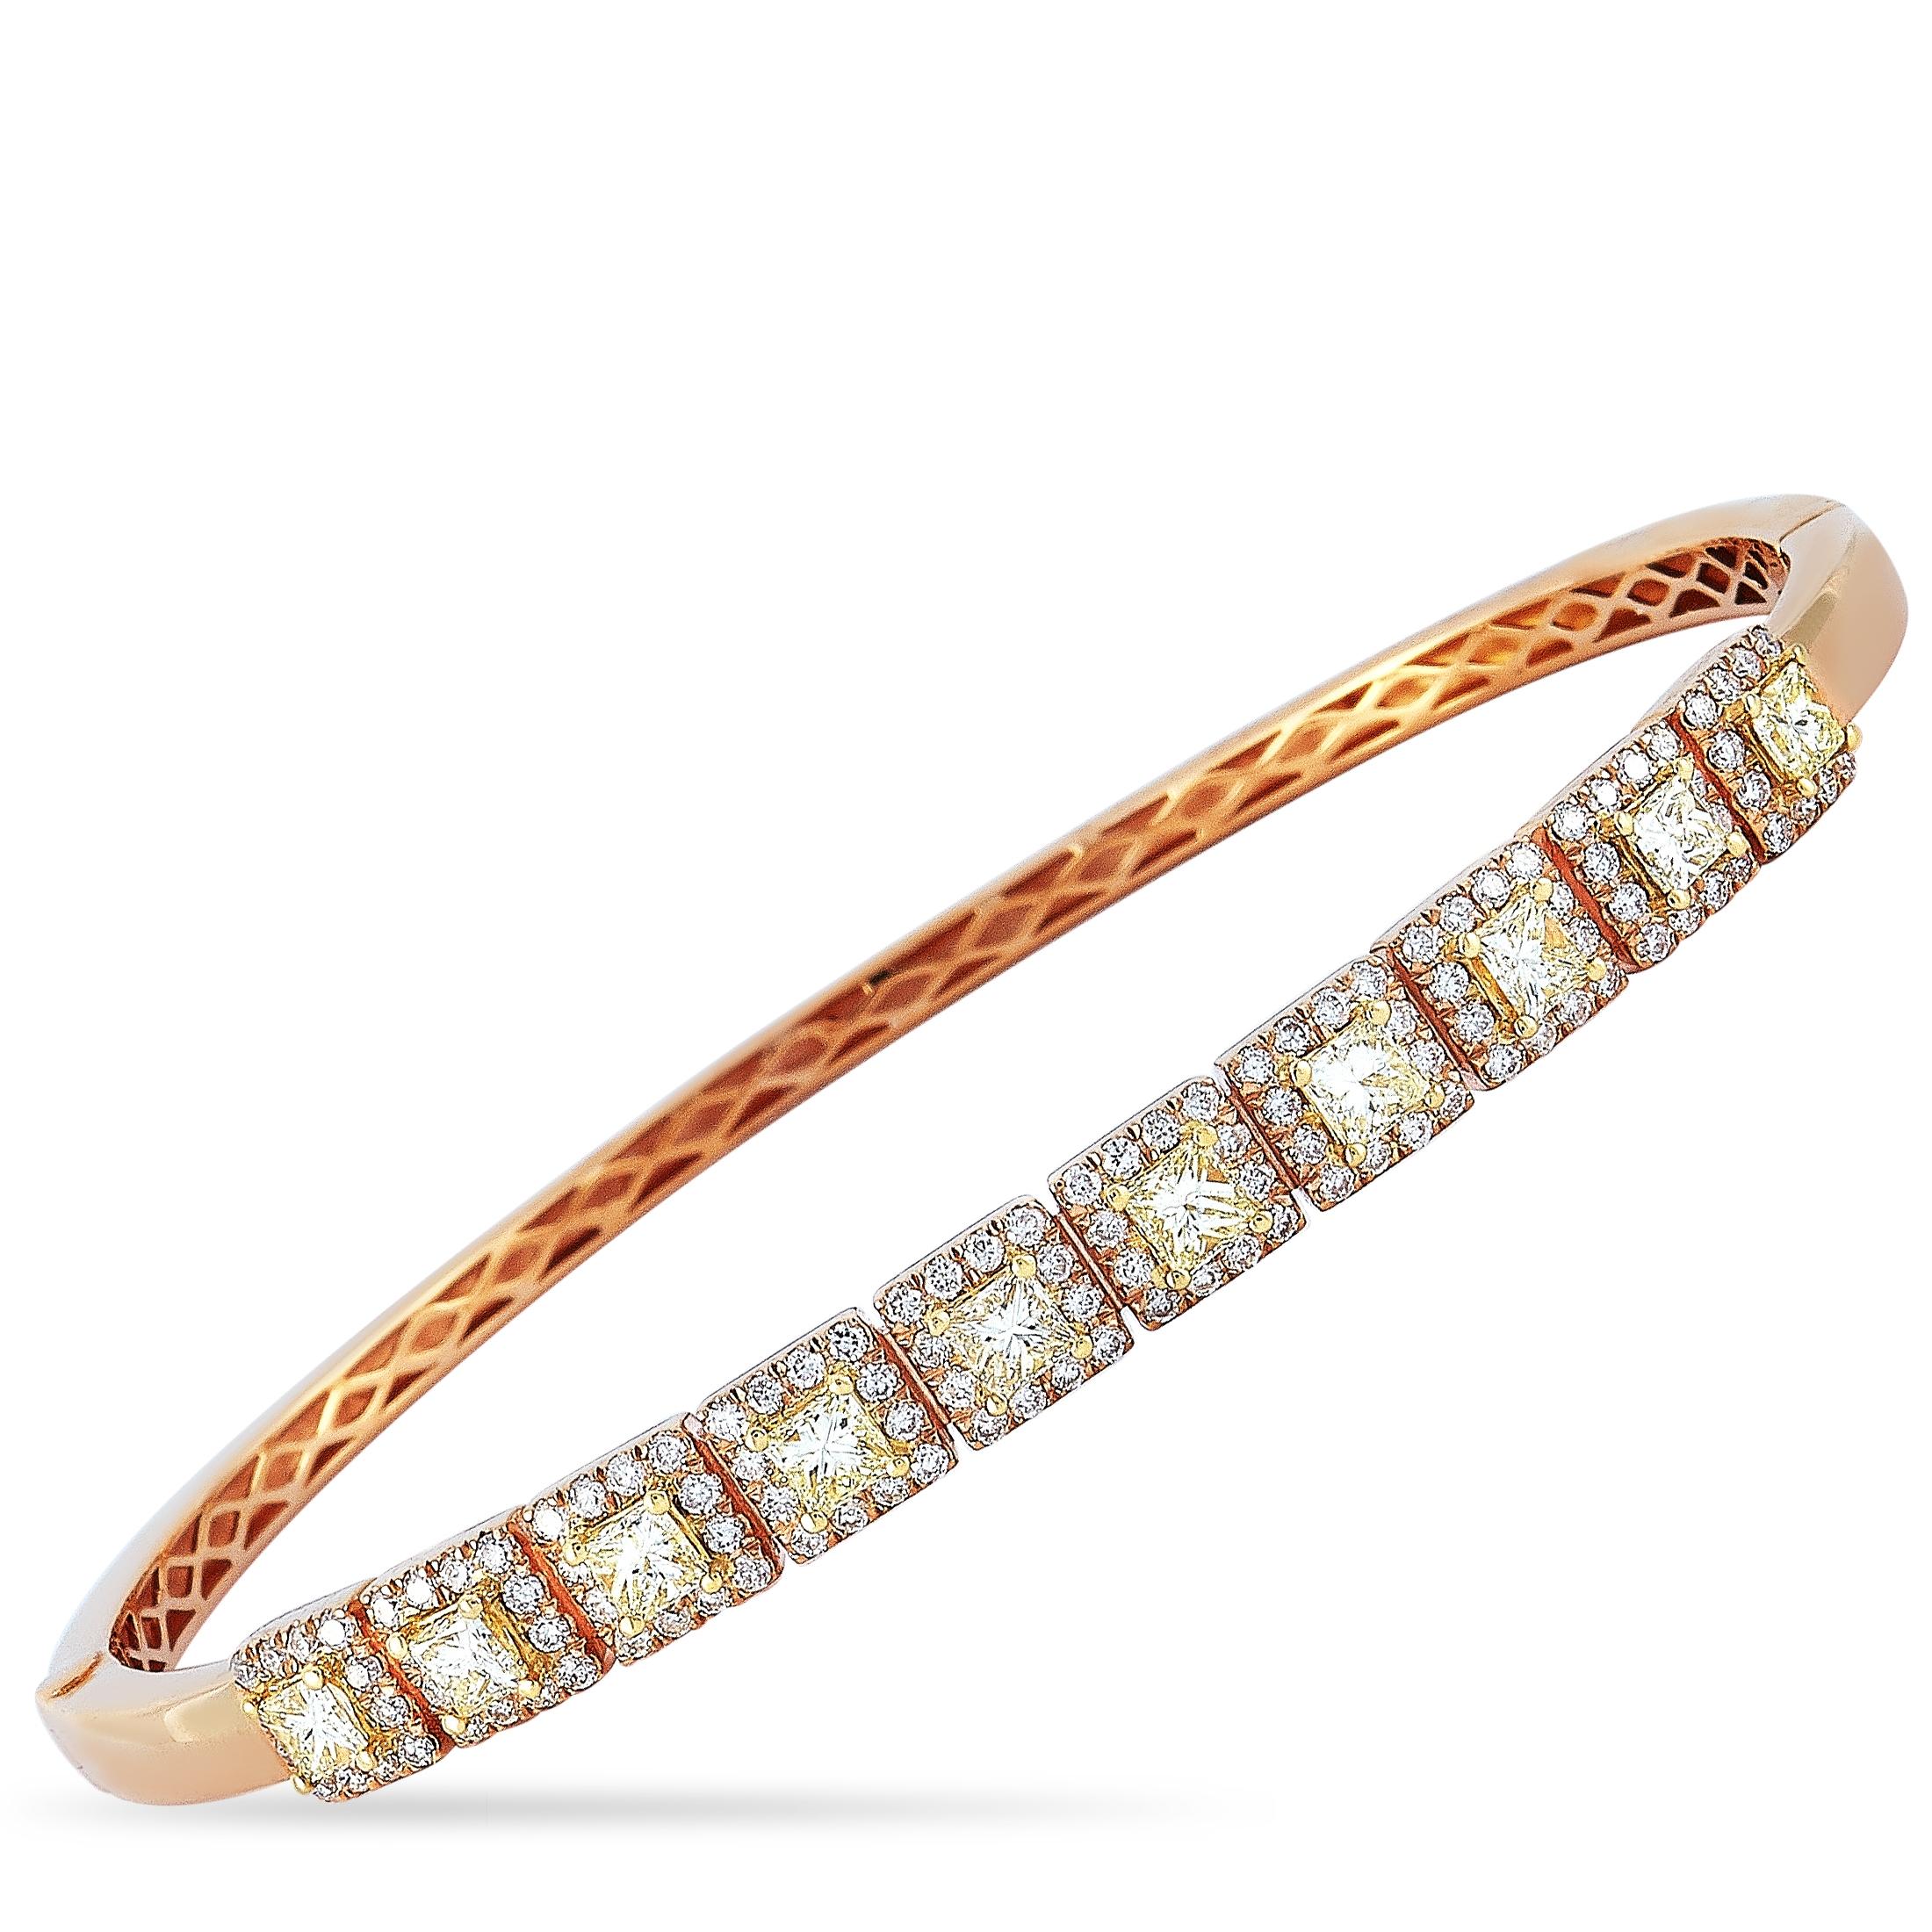 This LB Exclusive bracelet is made of 18K rose gold and weighs 13.6 grams, measuring 7” in length. The bracelet is set with white and yellow diamonds that total 0.79 and 1.36 carats respectively.

Offered in brand new condition, this jewelry piece